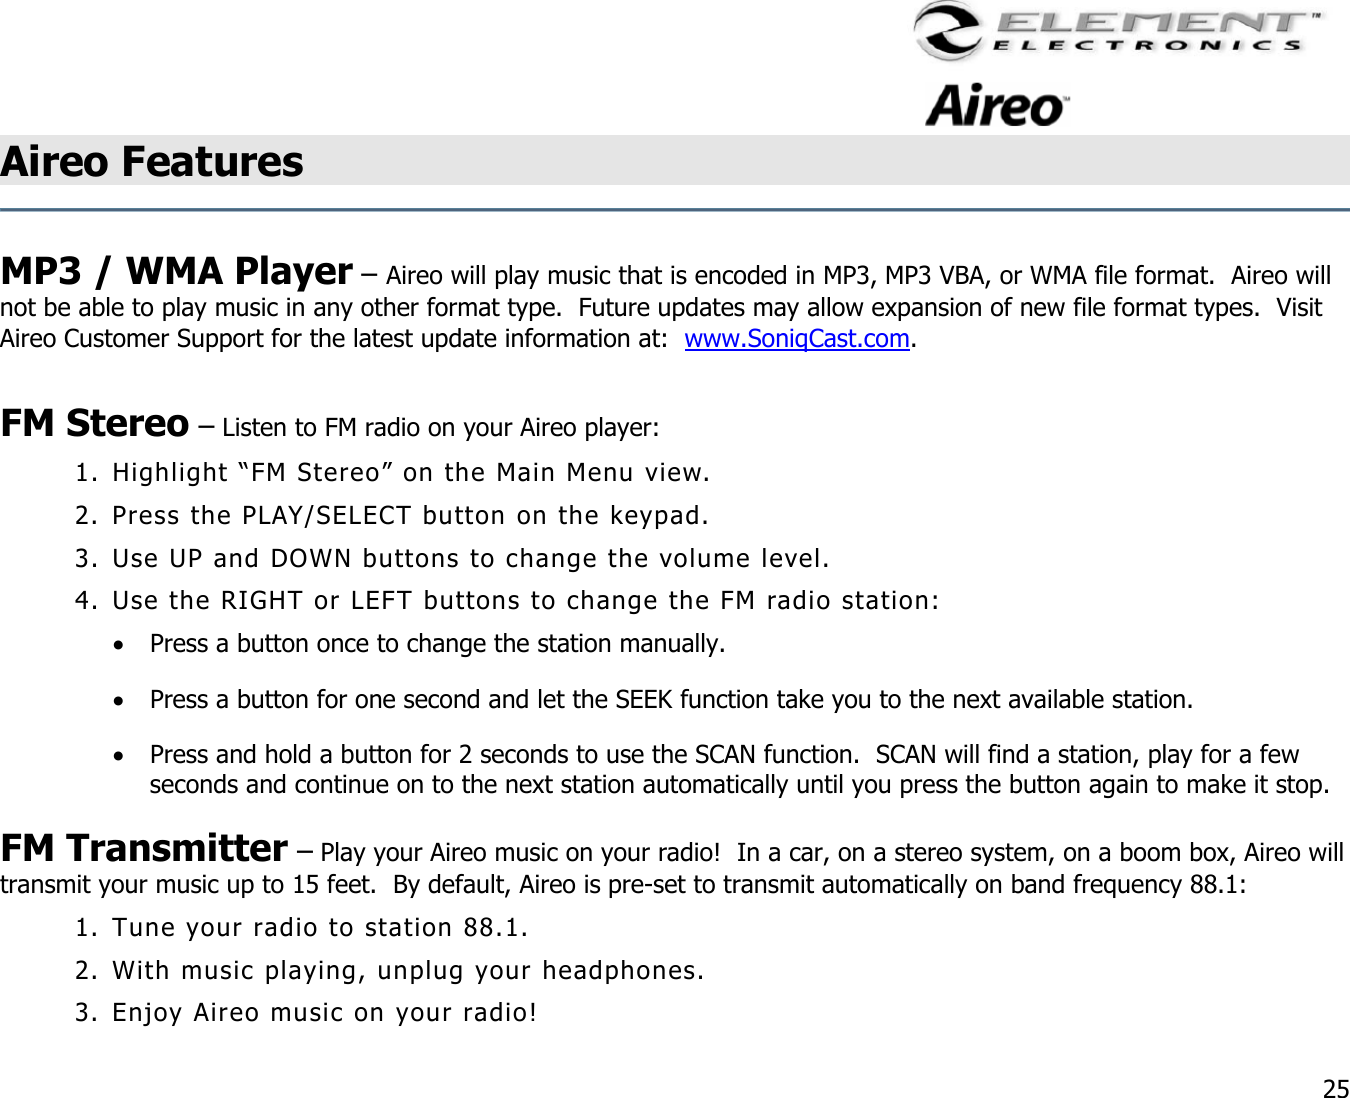                                                                                    25 Aireo Features    MP3 / WMA Player – Aireo will play music that is encoded in MP3, MP3 VBA, or WMA file format.  Aireo will not be able to play music in any other format type.  Future updates may allow expansion of new file format types.  Visit Aireo Customer Support for the latest update information at:  www.SoniqCast.com.  FM Stereo – Listen to FM radio on your Aireo player: 1. Highlight “FM Stereo” on the Main Menu view. 2. Press the PLAY/SELECT button on the keypad. 3. Use UP and DOWN buttons to change the volume level. 4. Use the RIGHT or LEFT buttons to change the FM radio station: •  Press a button once to change the station manually. •  Press a button for one second and let the SEEK function take you to the next available station. •  Press and hold a button for 2 seconds to use the SCAN function.  SCAN will find a station, play for a few seconds and continue on to the next station automatically until you press the button again to make it stop.  FM Transmitter – Play your Aireo music on your radio!  In a car, on a stereo system, on a boom box, Aireo will transmit your music up to 15 feet.  By default, Aireo is pre-set to transmit automatically on band frequency 88.1: 1. Tune your radio to station 88.1.   2. With music playing, unplug your headphones. 3. Enjoy Aireo music on your radio! 